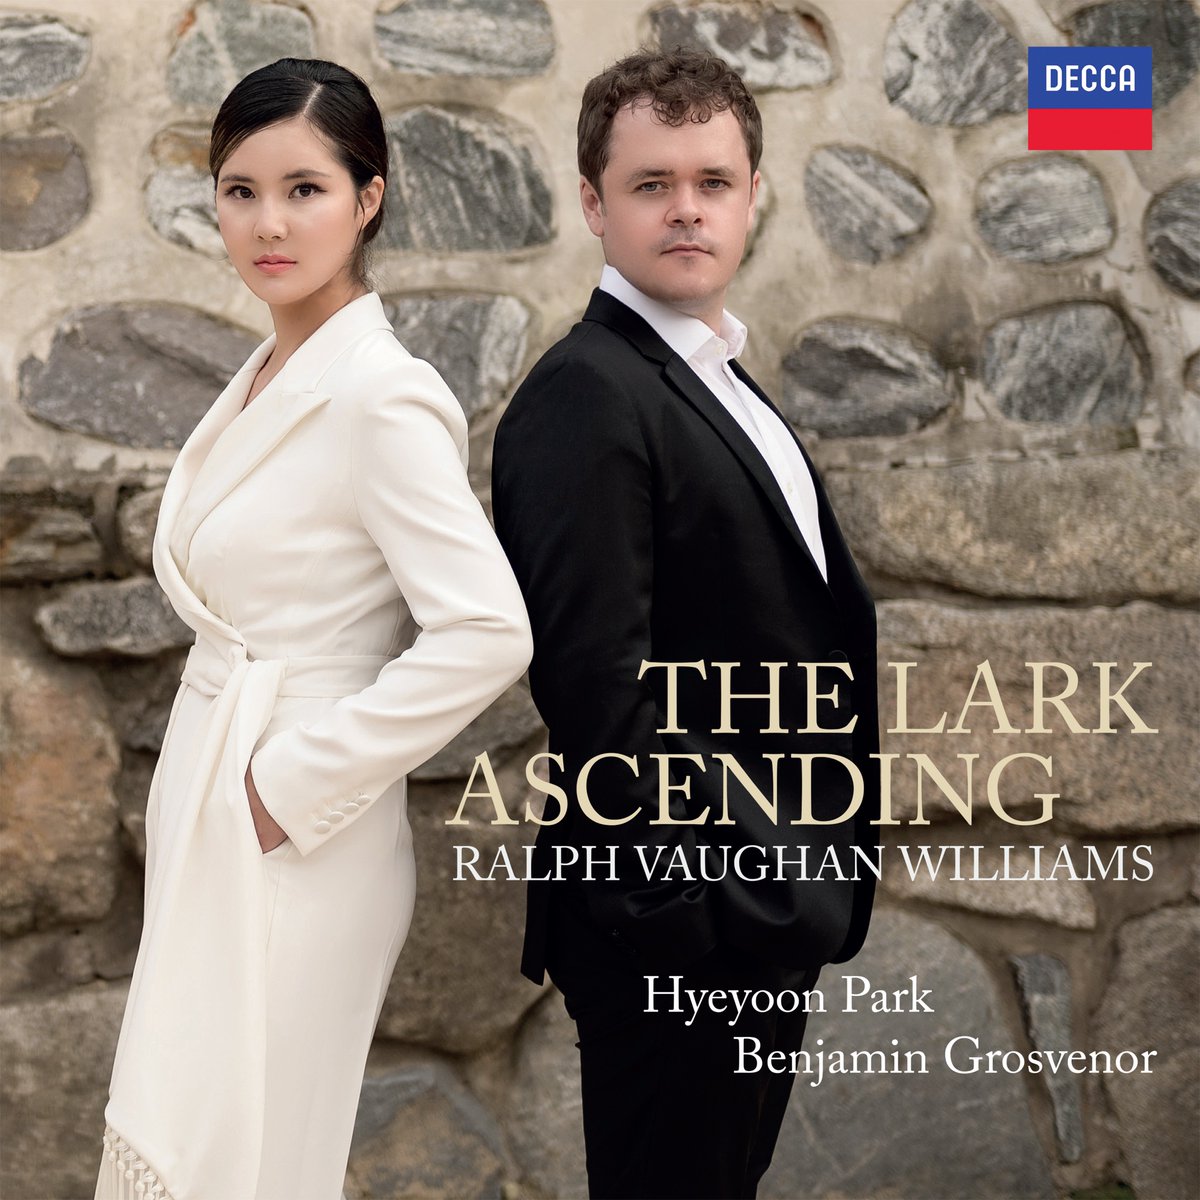 Out now! 🎧Delighted to have recorded with @hyeyoon_park the original violin/piano version of the Lark Ascending by Vaughan Williams for @deccaclassics to celebrate his 150th anniversary! Now available on all streaming platforms grosvenorandpark.lnk.to/LarkAscendingSo